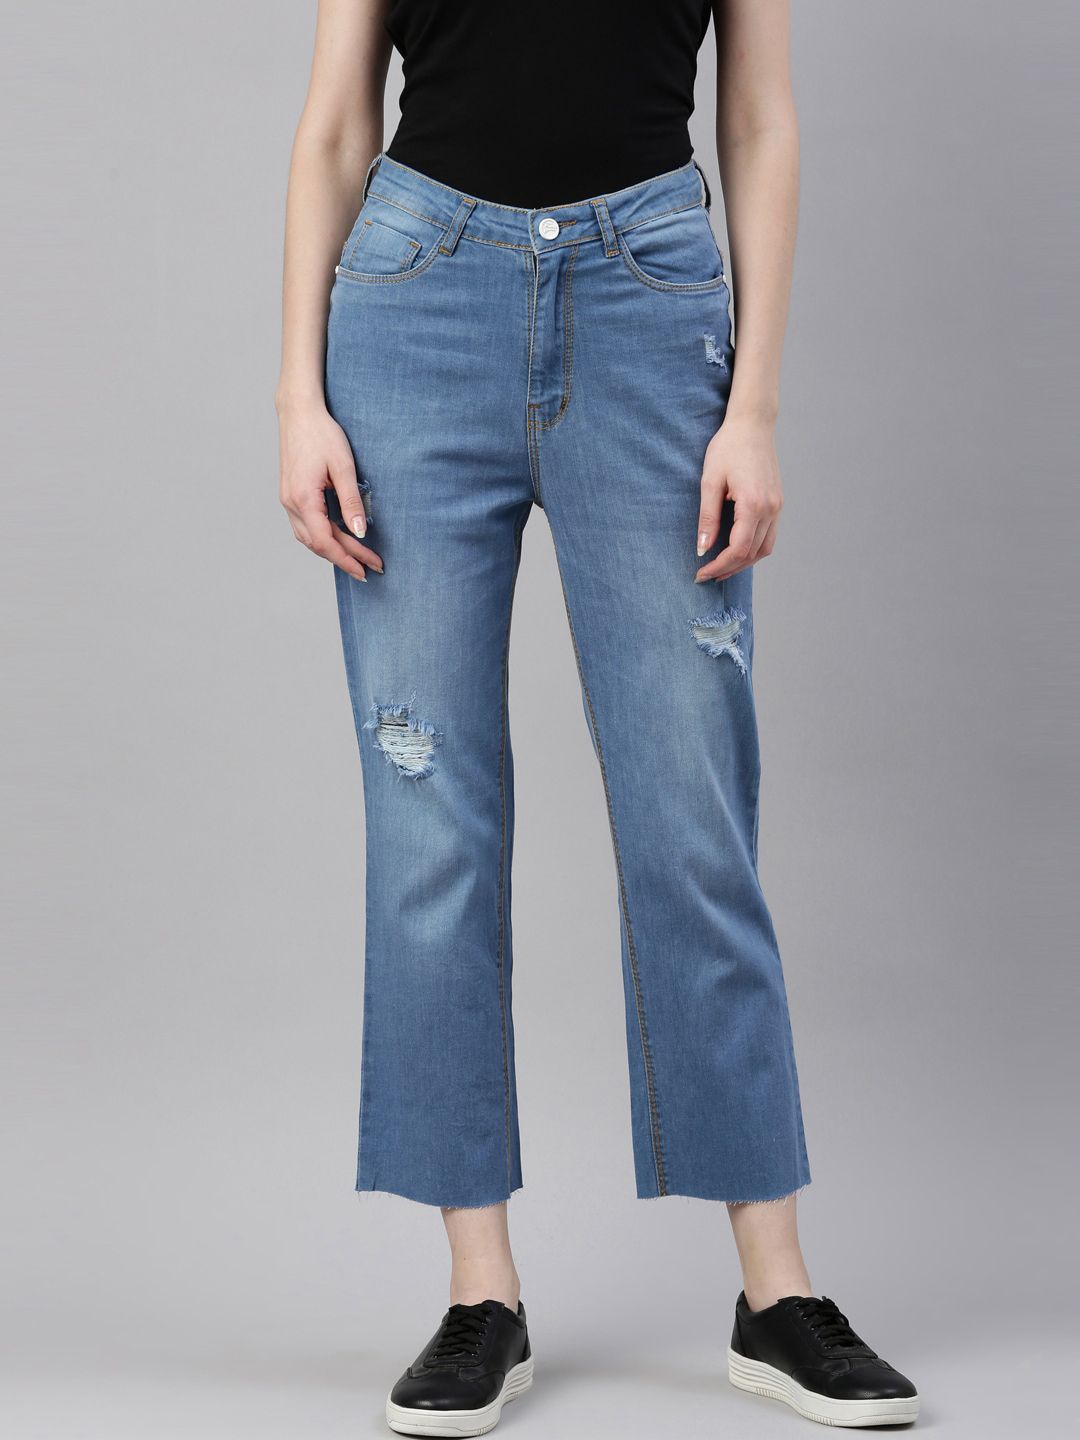 ZHEIA Women Blue High-Rise Stretchable Jeans Price in India